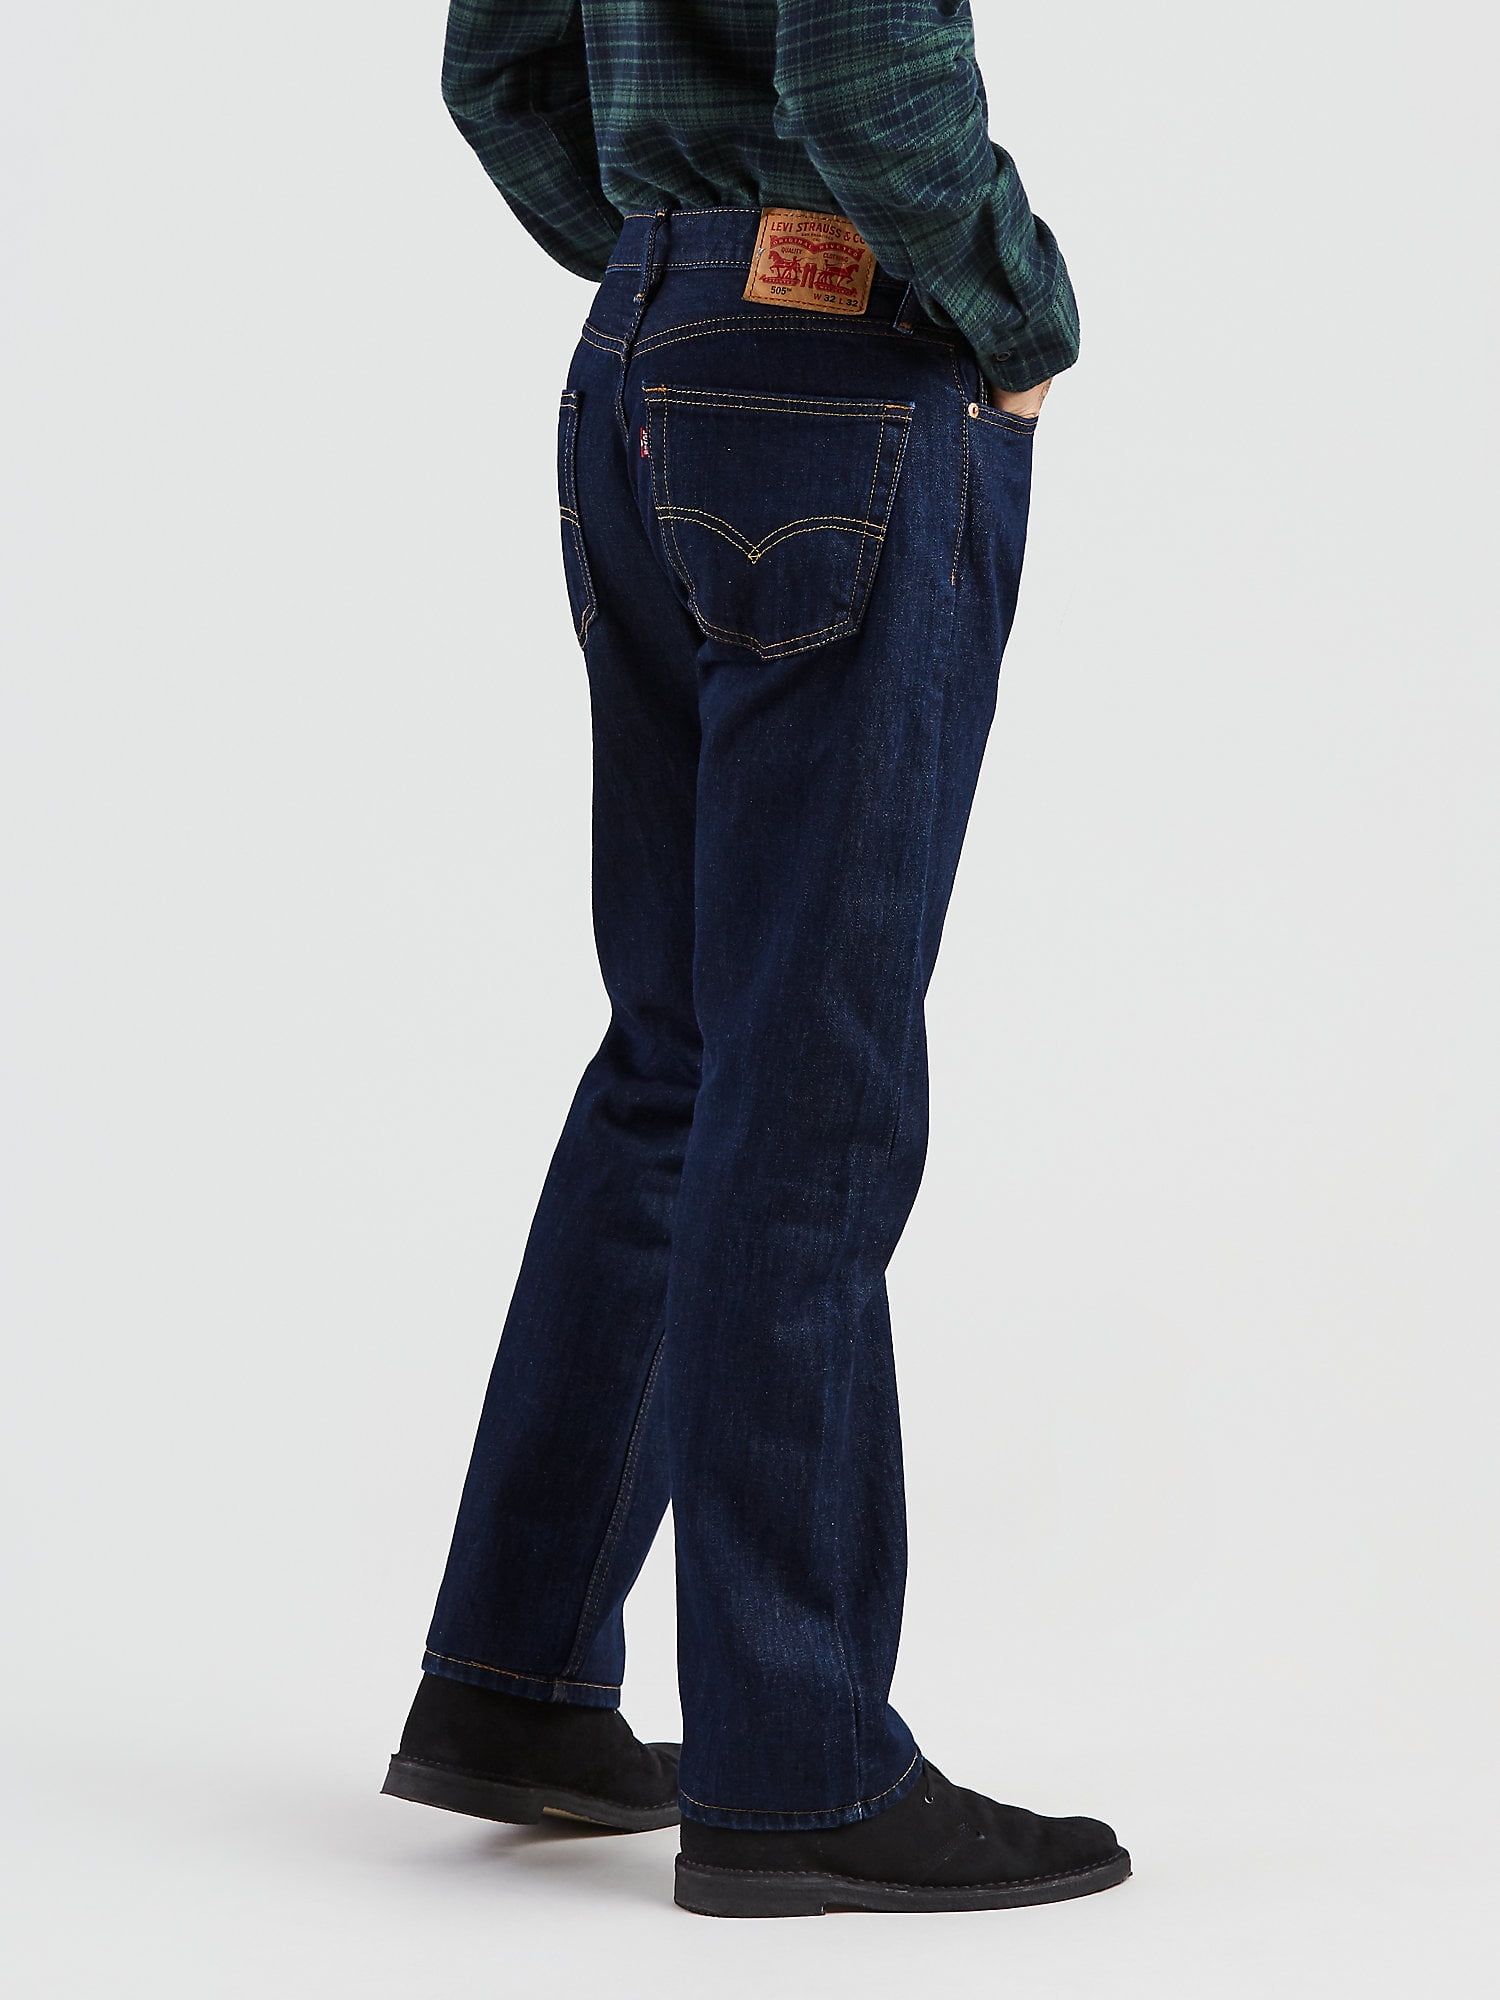 best price on mens levis 505 jeans